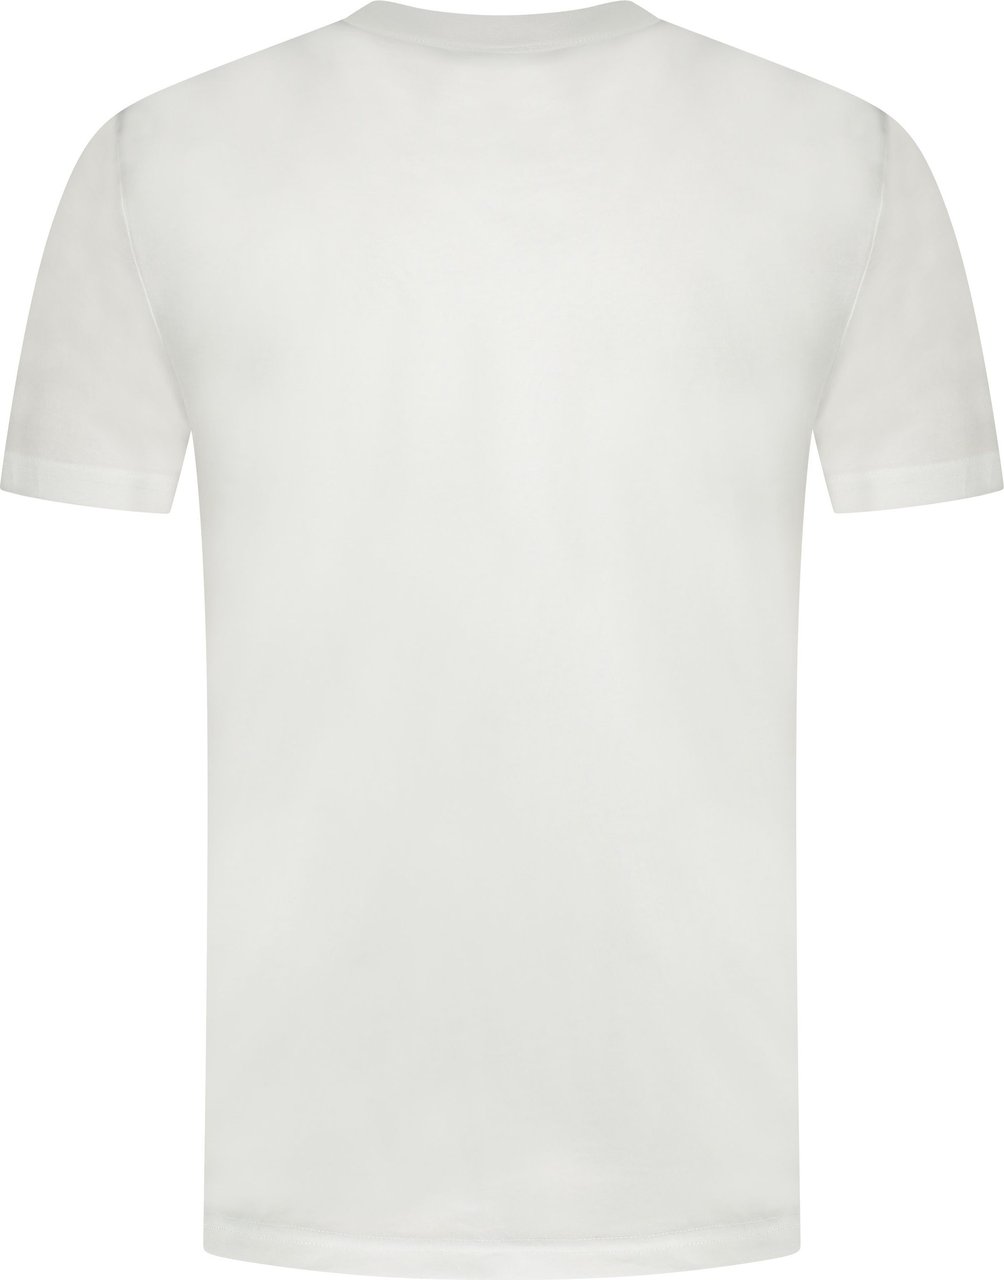 Fred Perry T-shirt Wit Wit